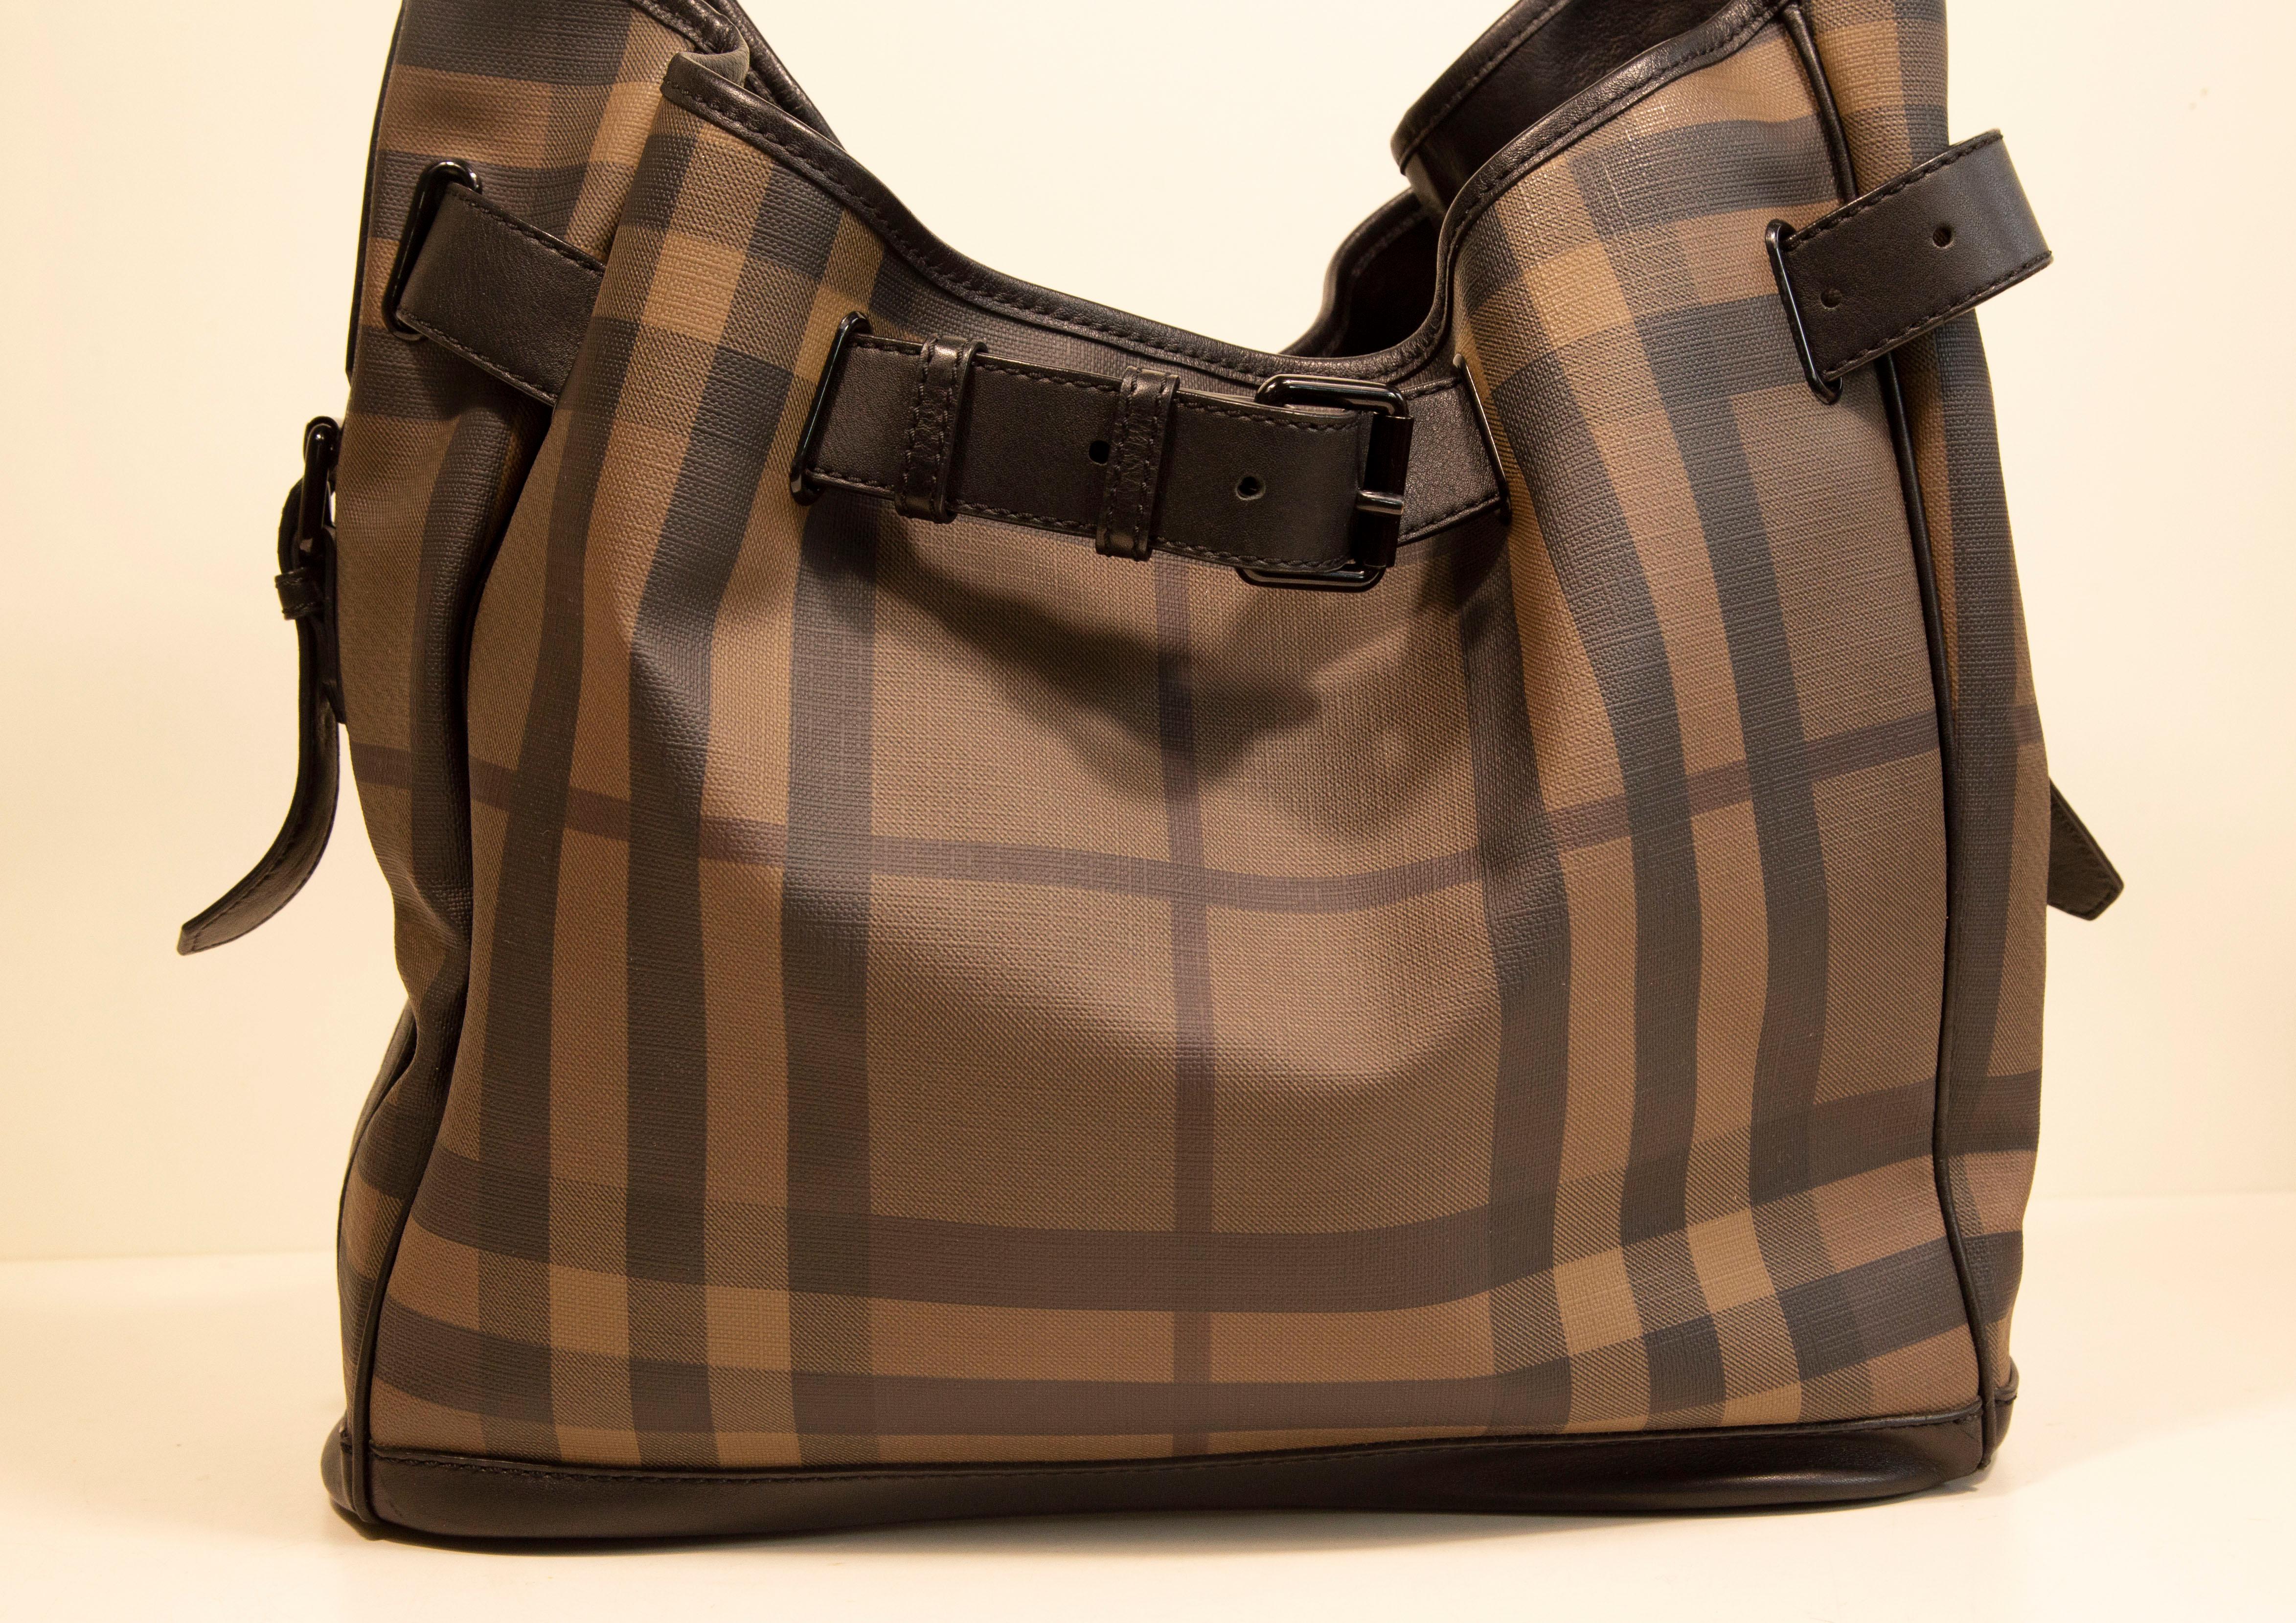 An authentic Burberry shoulder bag. The bag features a black/gray  check canvas exterior, black leather trim, and black-toned hardware. The interior is lined with black fabric and is separated into two main compartments by a zipped pocket